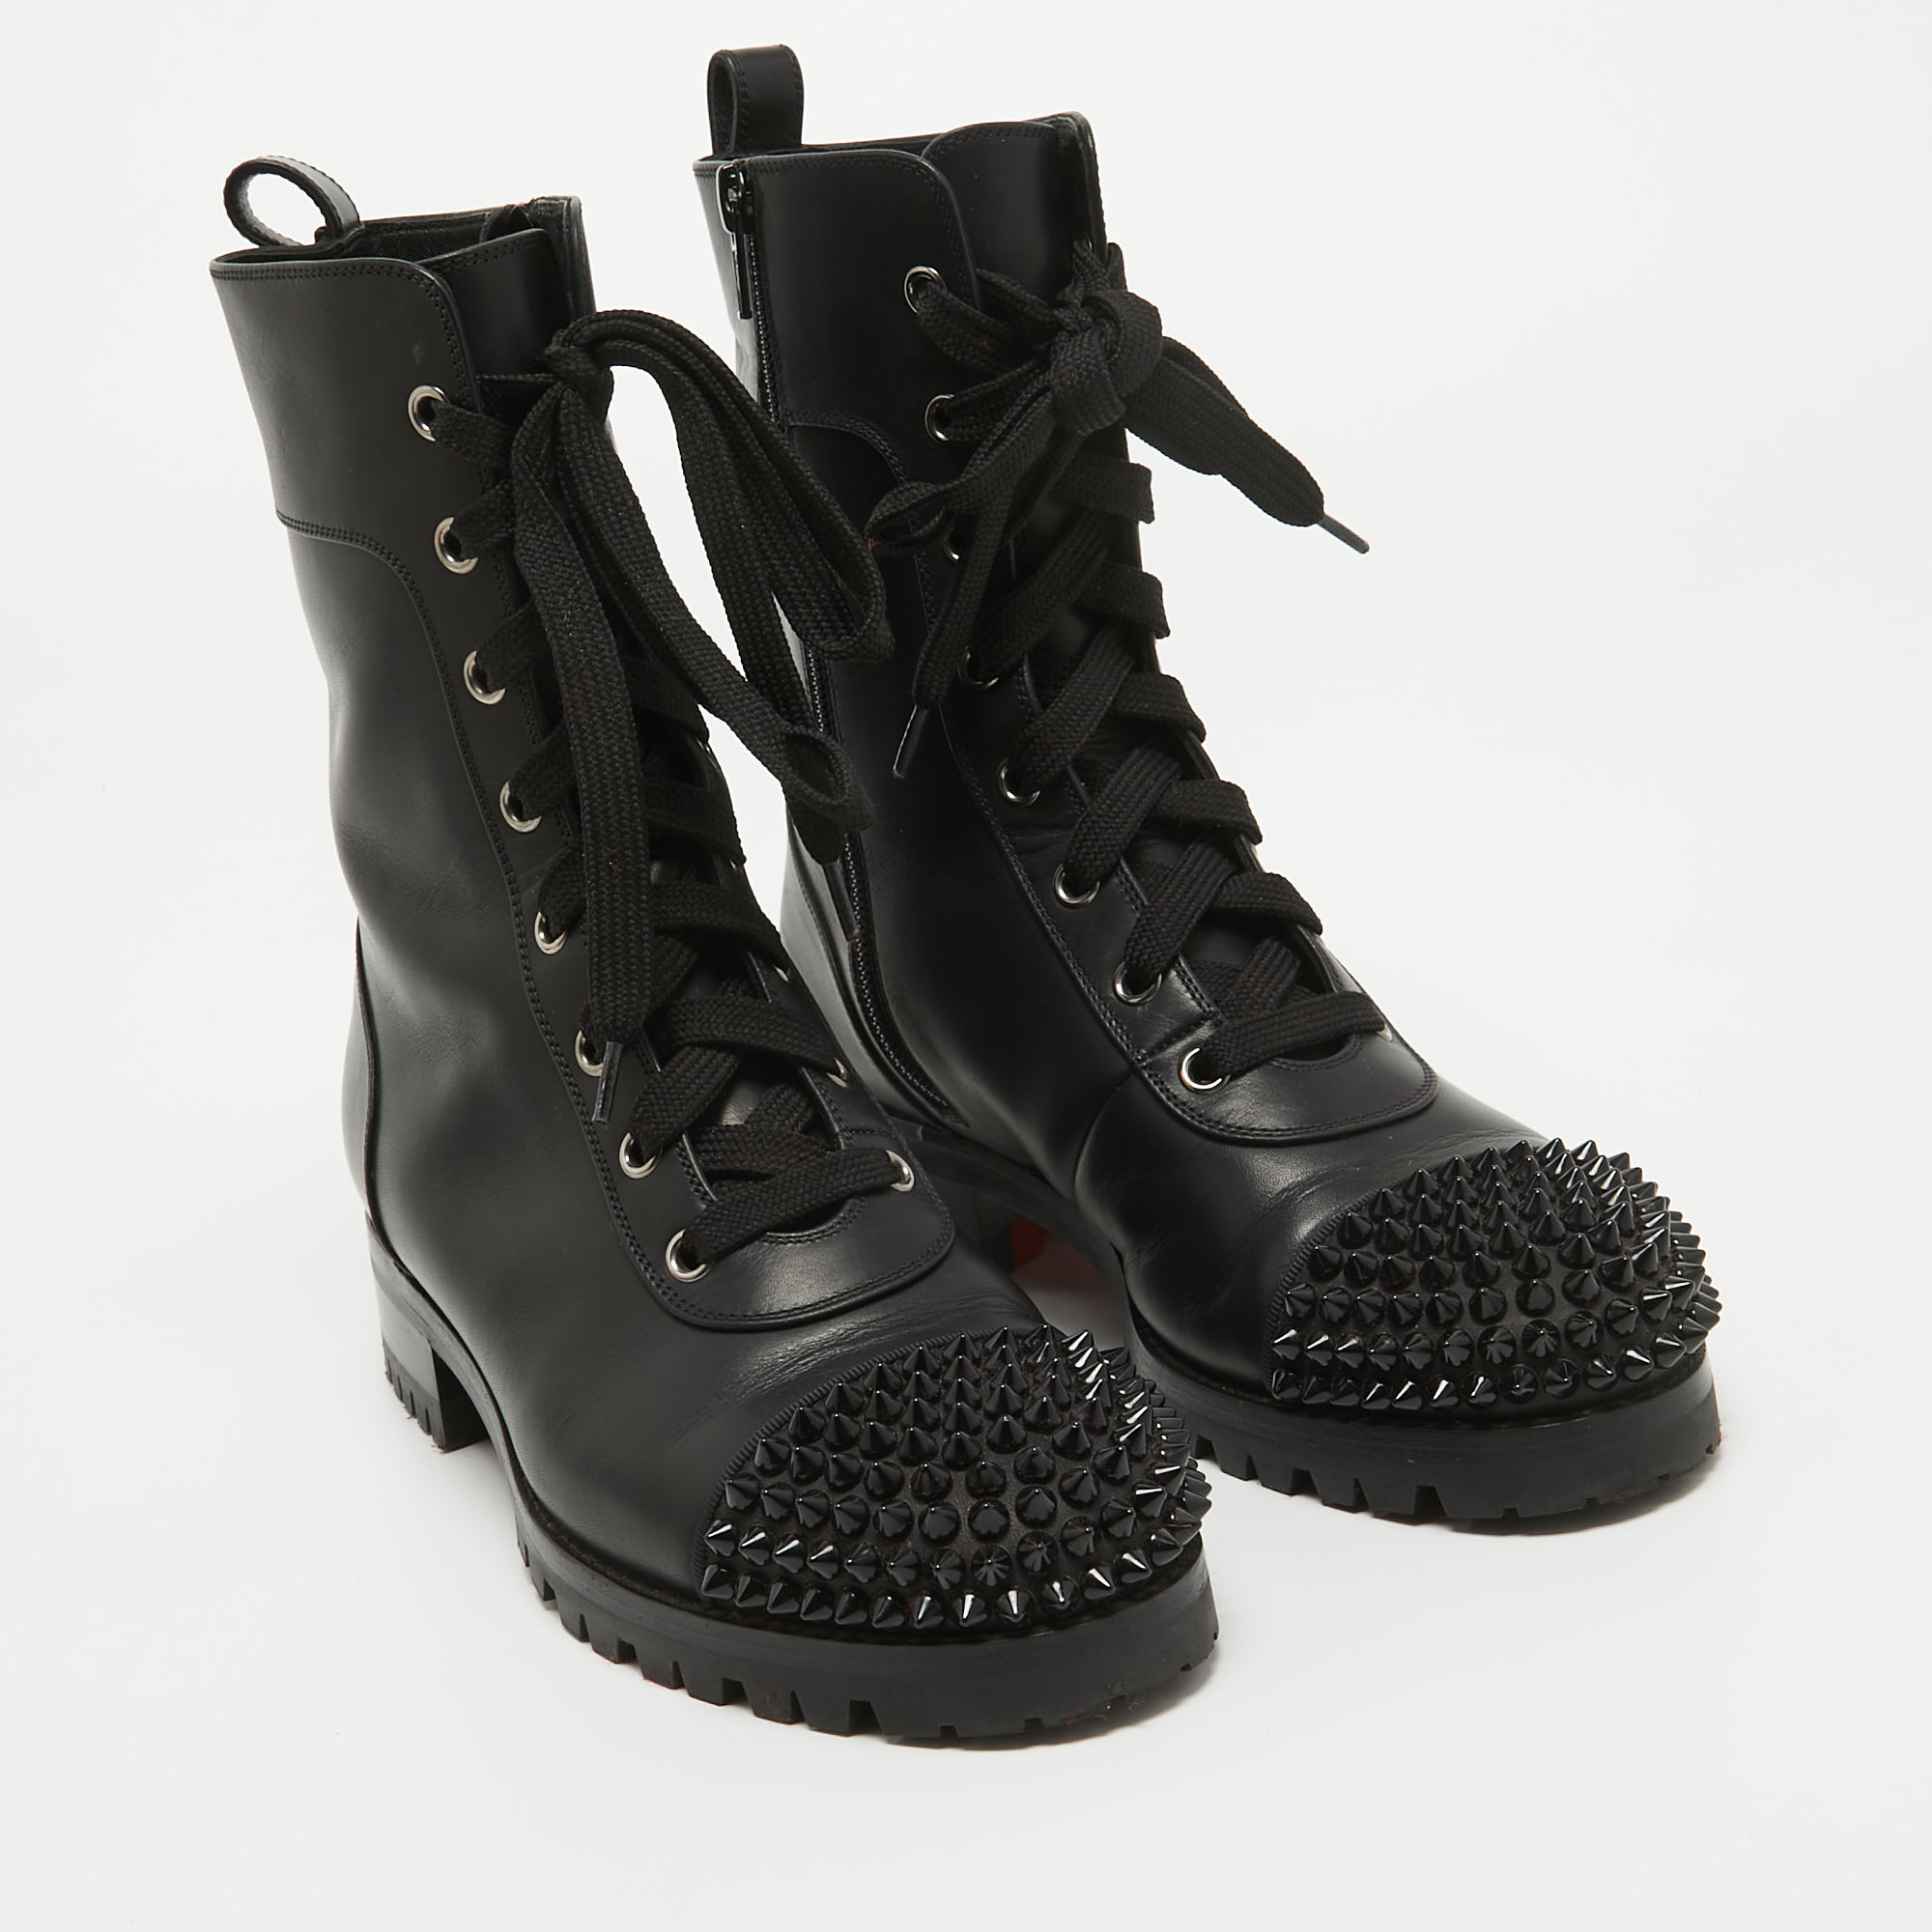 Christian Louboutin Black Leather TS Croc Spiked Ankle Boots Size 36